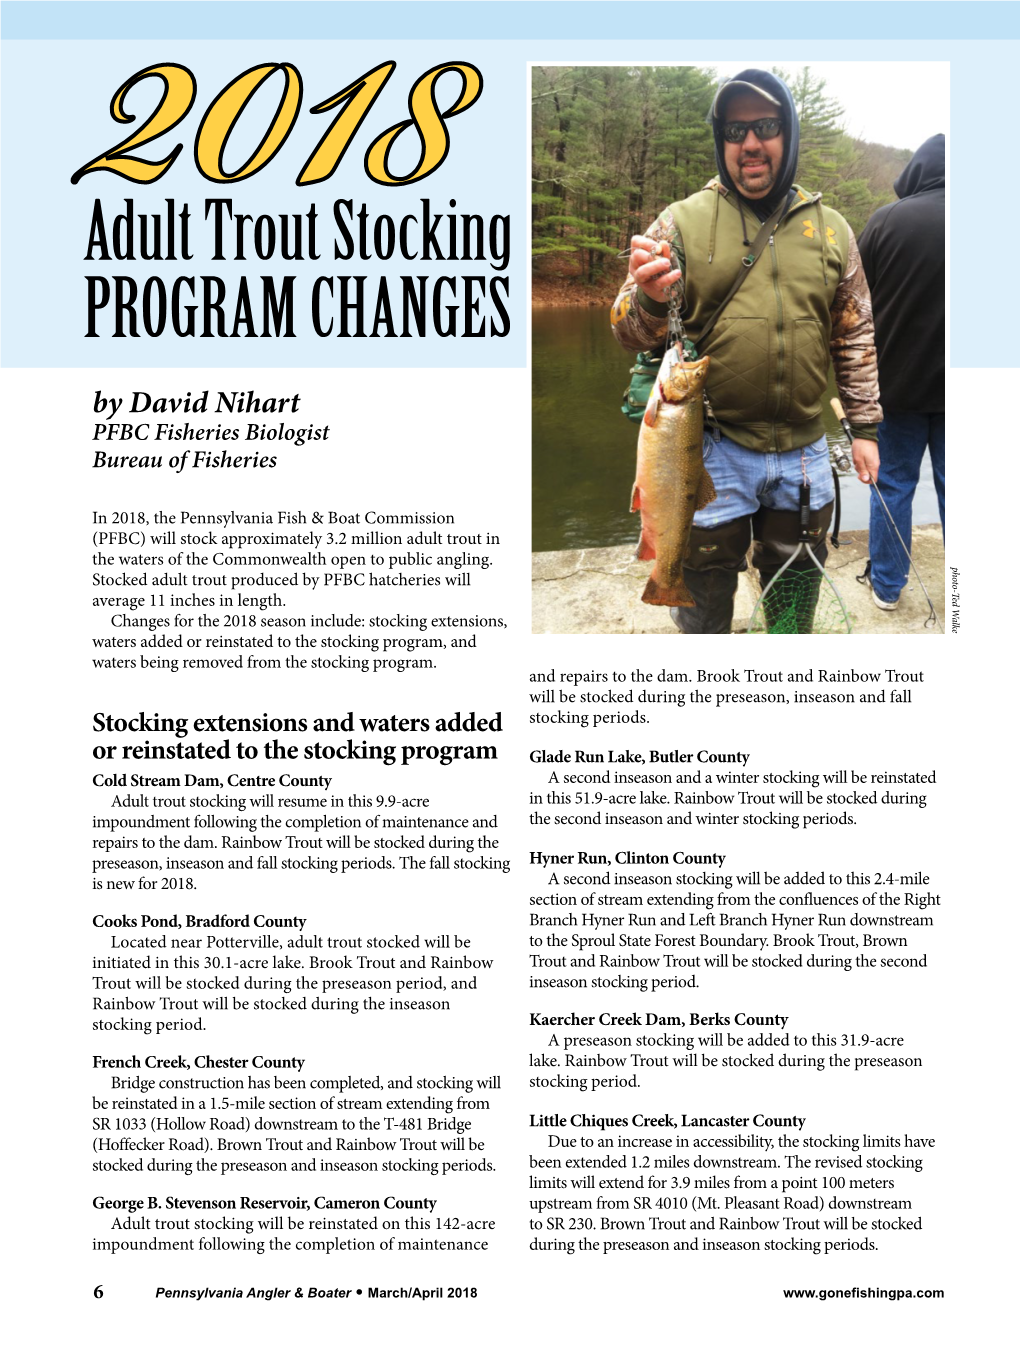 2018 Adult Trout Stocking Program Changes